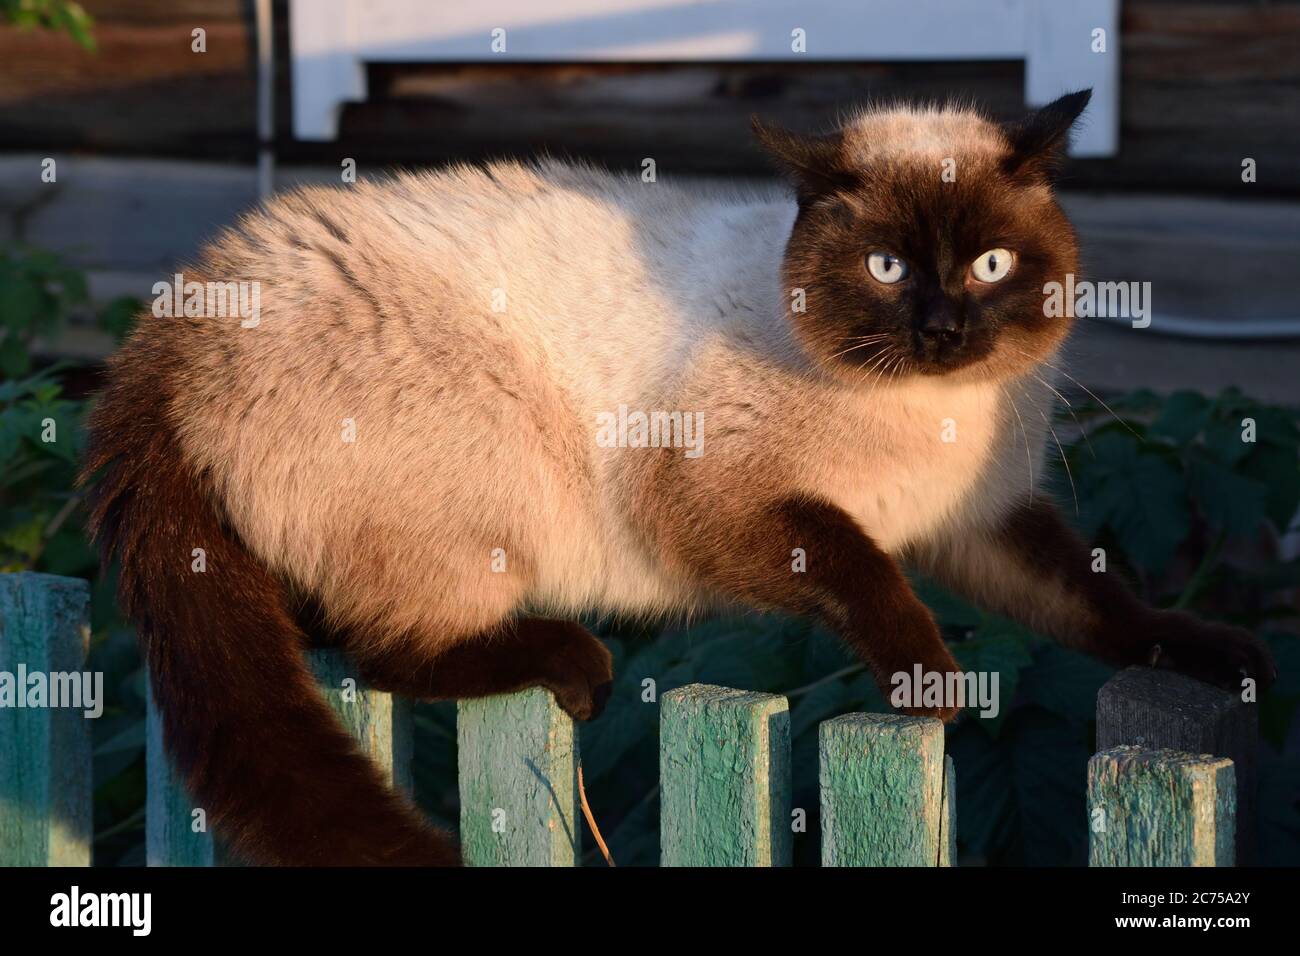 Angry Cat Striking a Fighting Pose on a Fence to Intimidate Another Cat Stock Photo